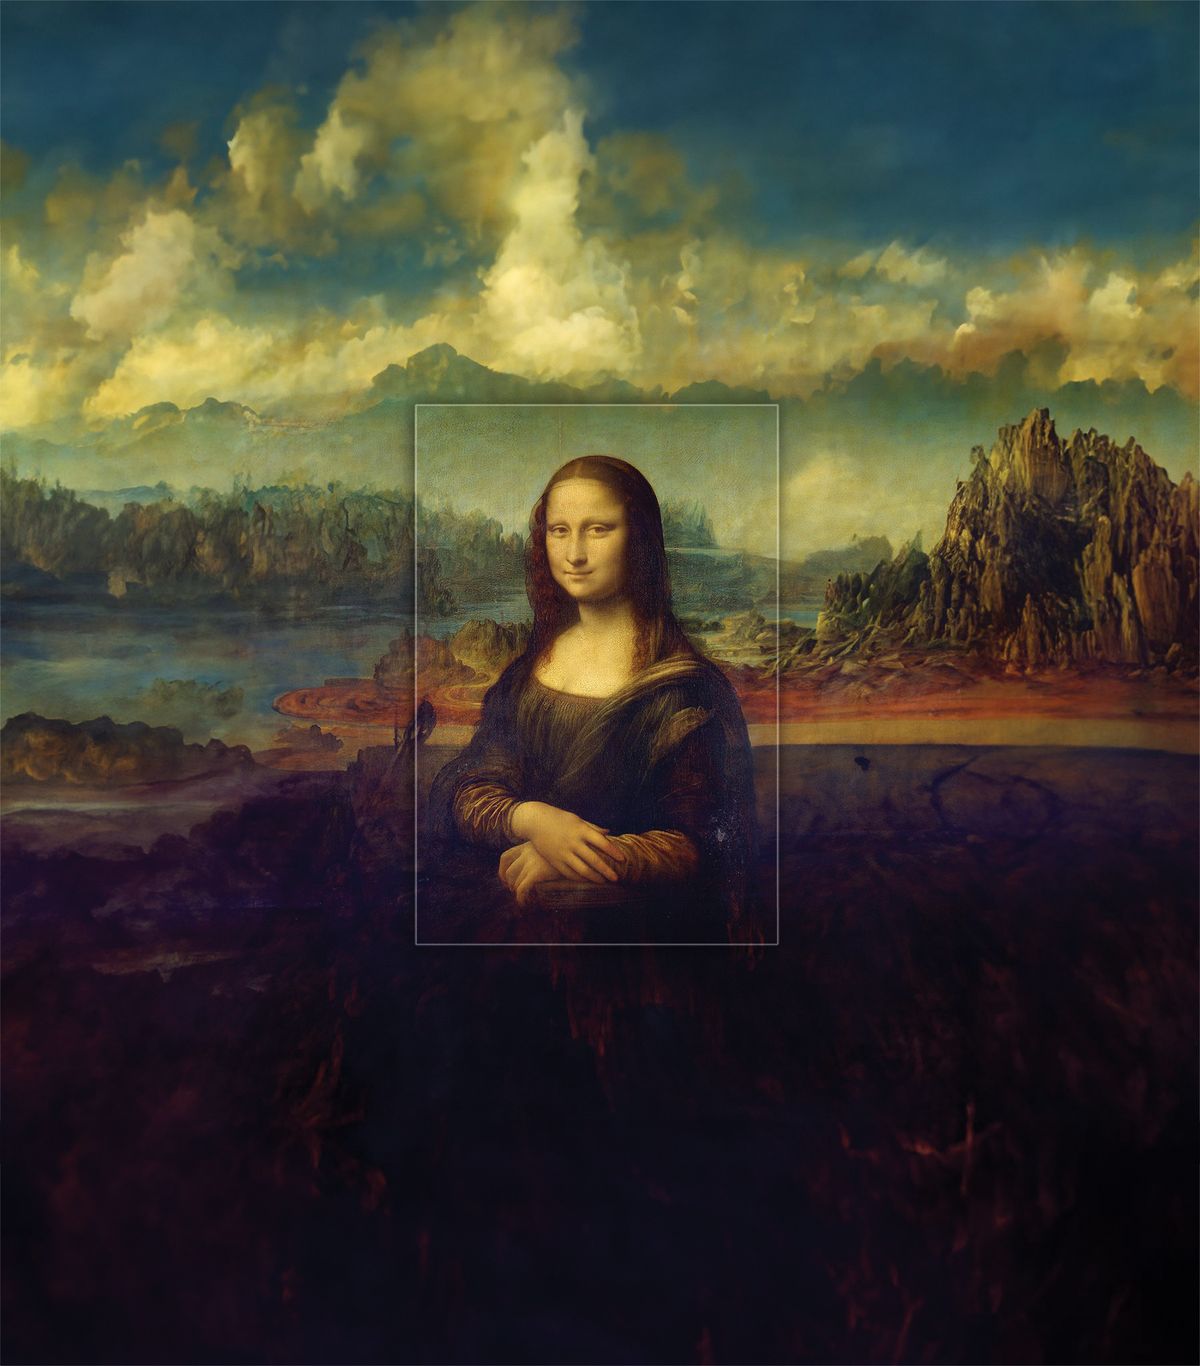 “No sane person” has ever wondered what the rest of Leonardo da Vinci’s Mona Lisa masterpiece might have looked like, complained one Twitter user in response to Kody Young’s AI-generated work, which extended the painting’s background Kody Young/Your AI Interpreter